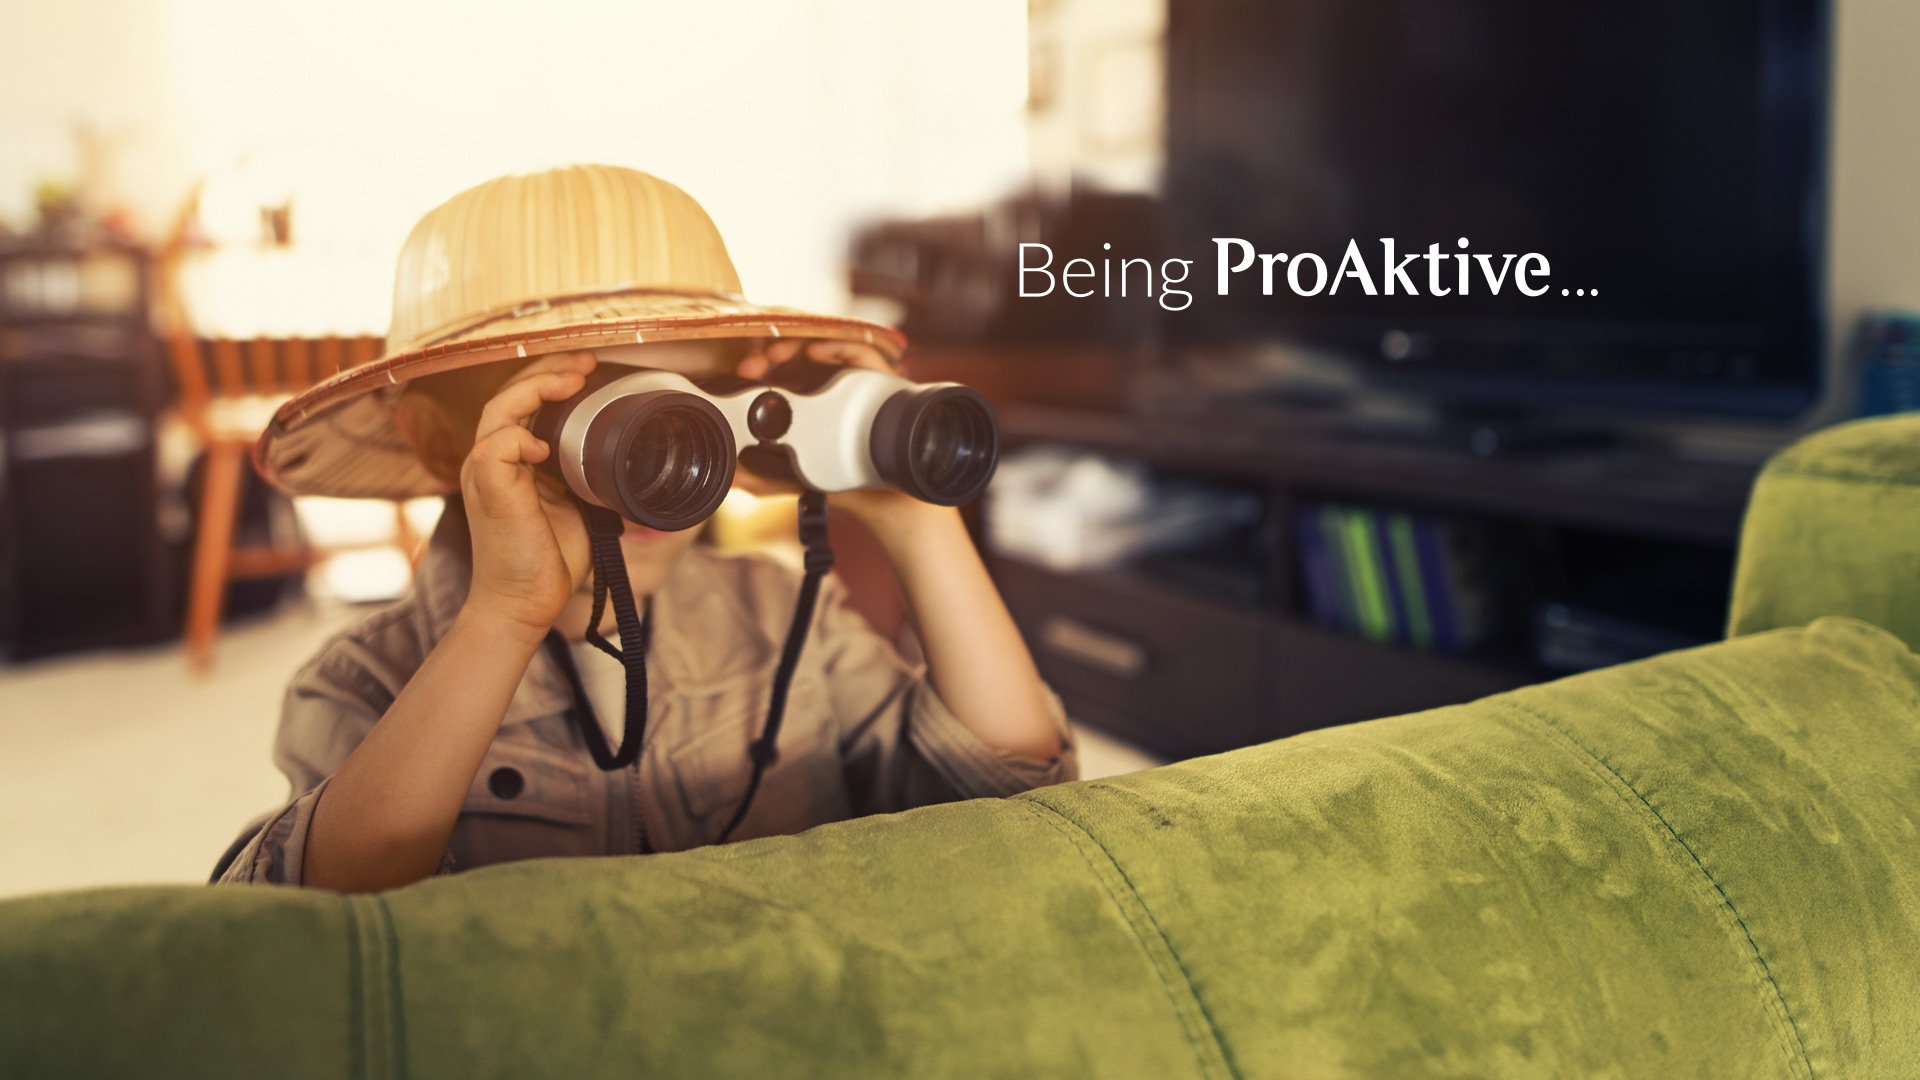 Being ProAktive Means...